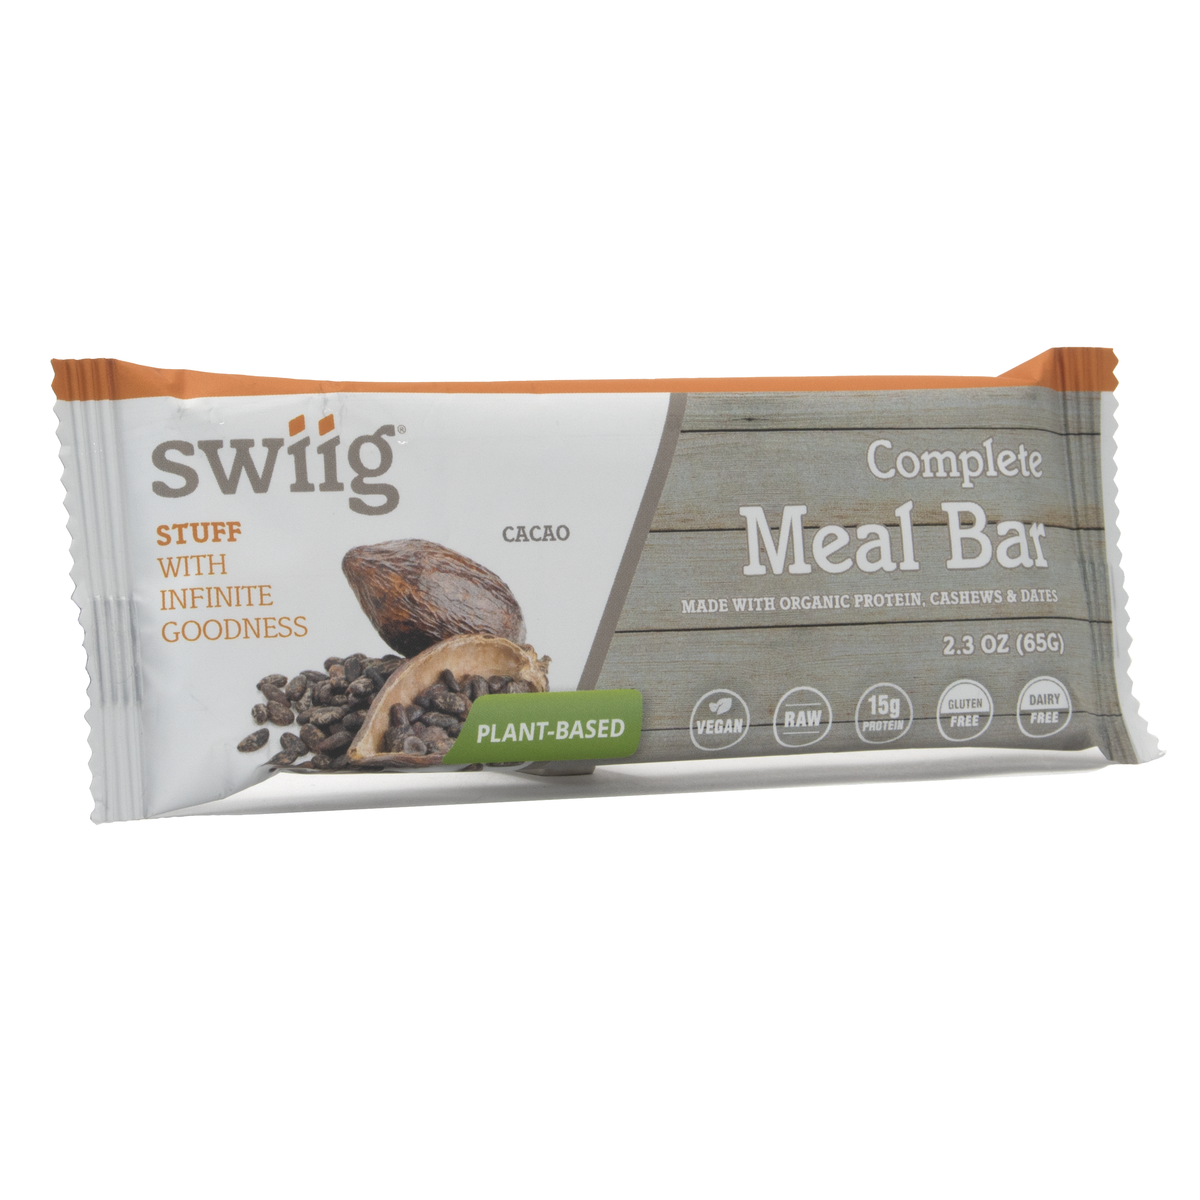 Complete Meal Bar Chocolate - 12ct